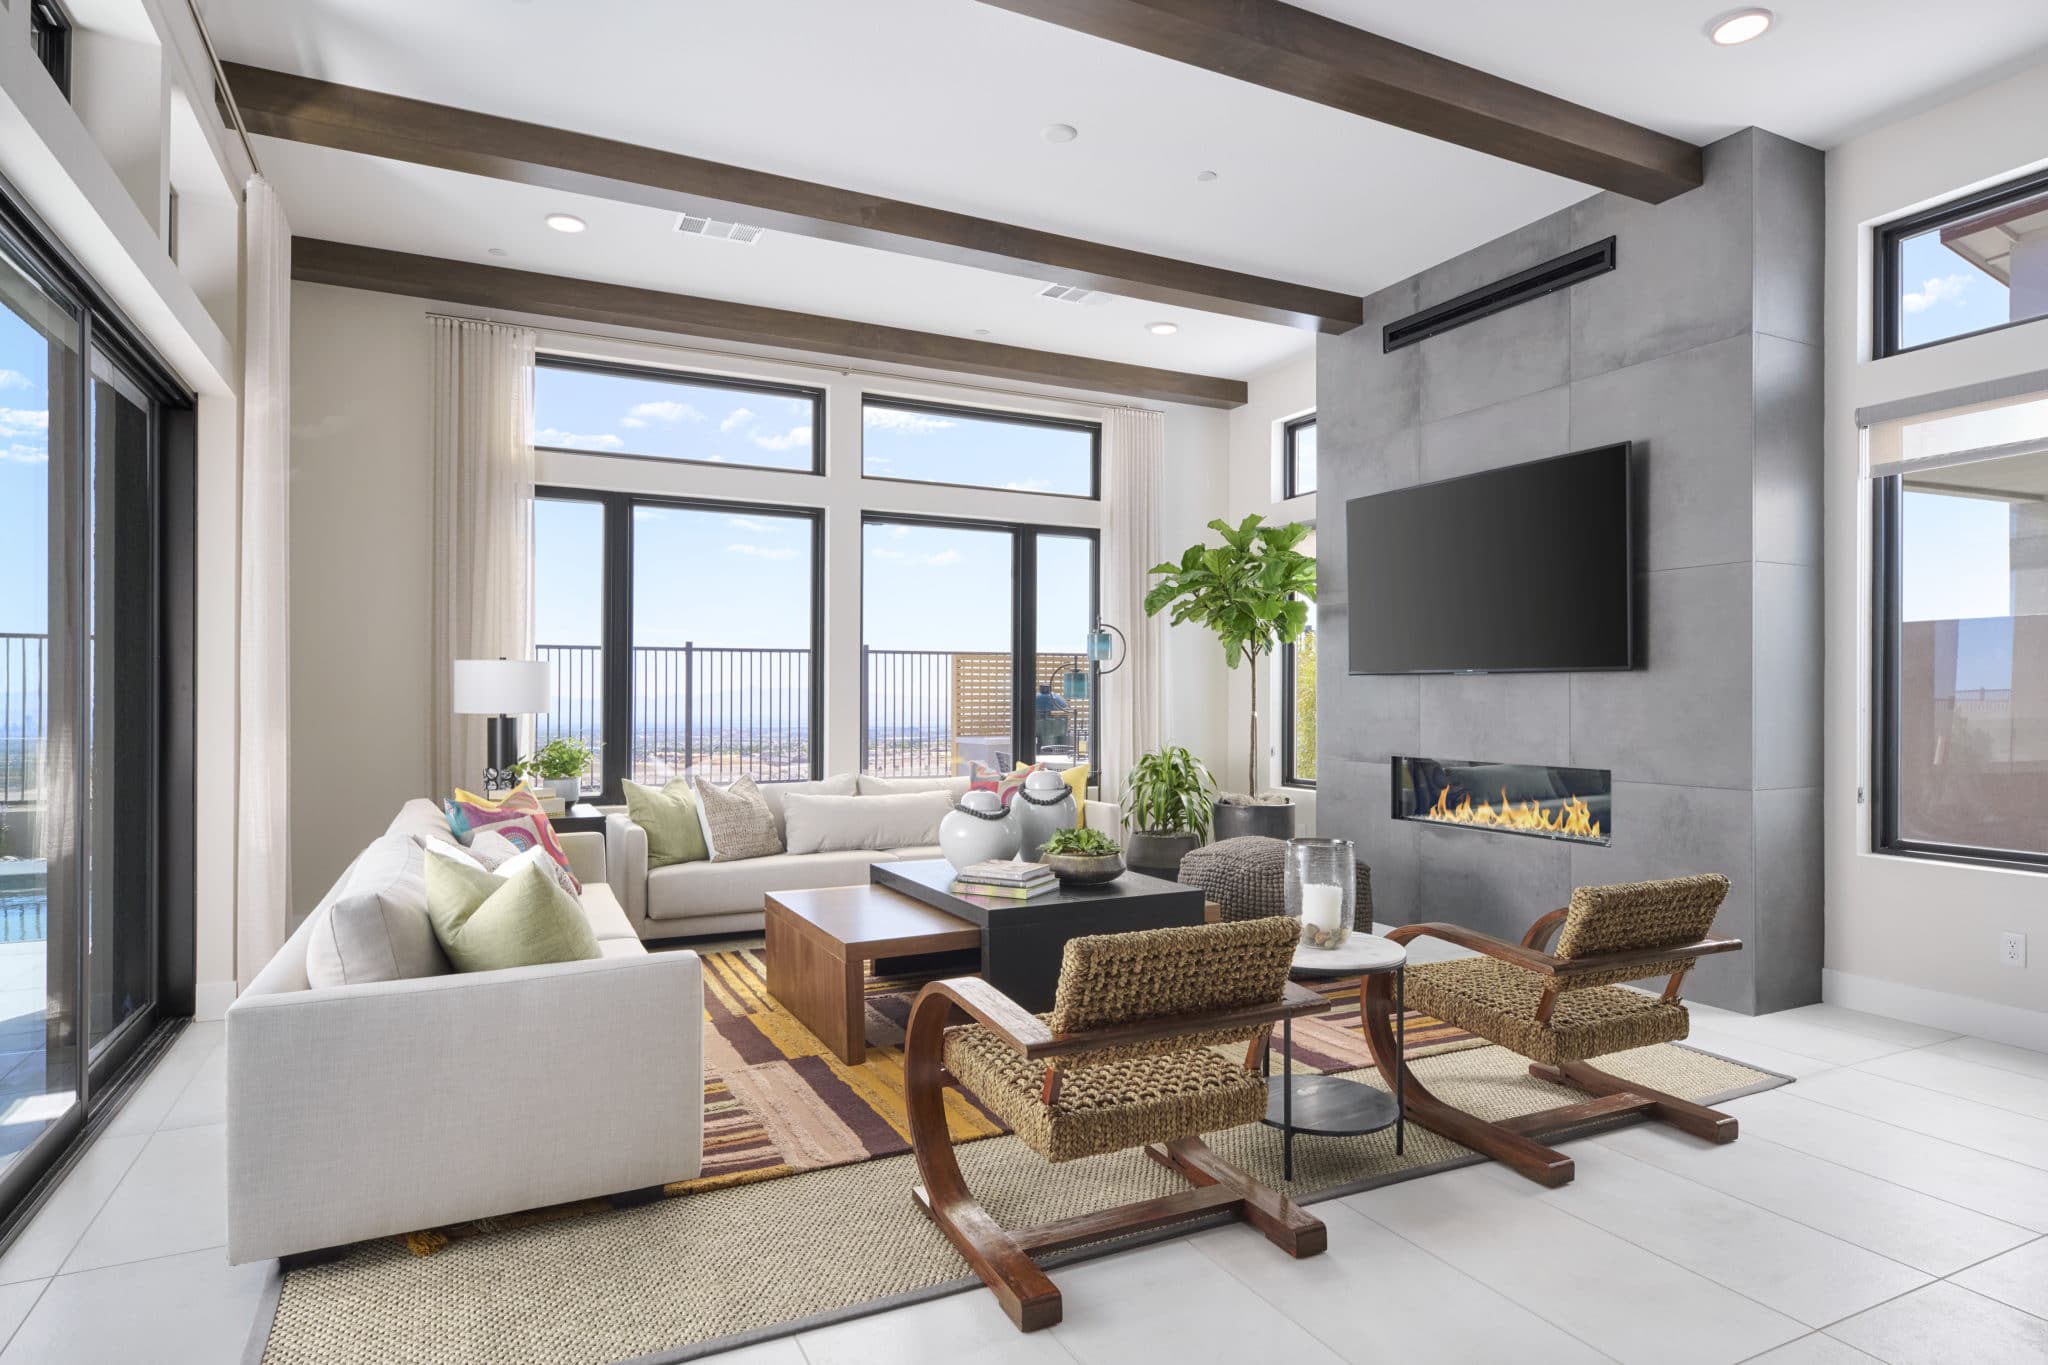 Great Room of Plan 2 at Overlook by Tri Pointe